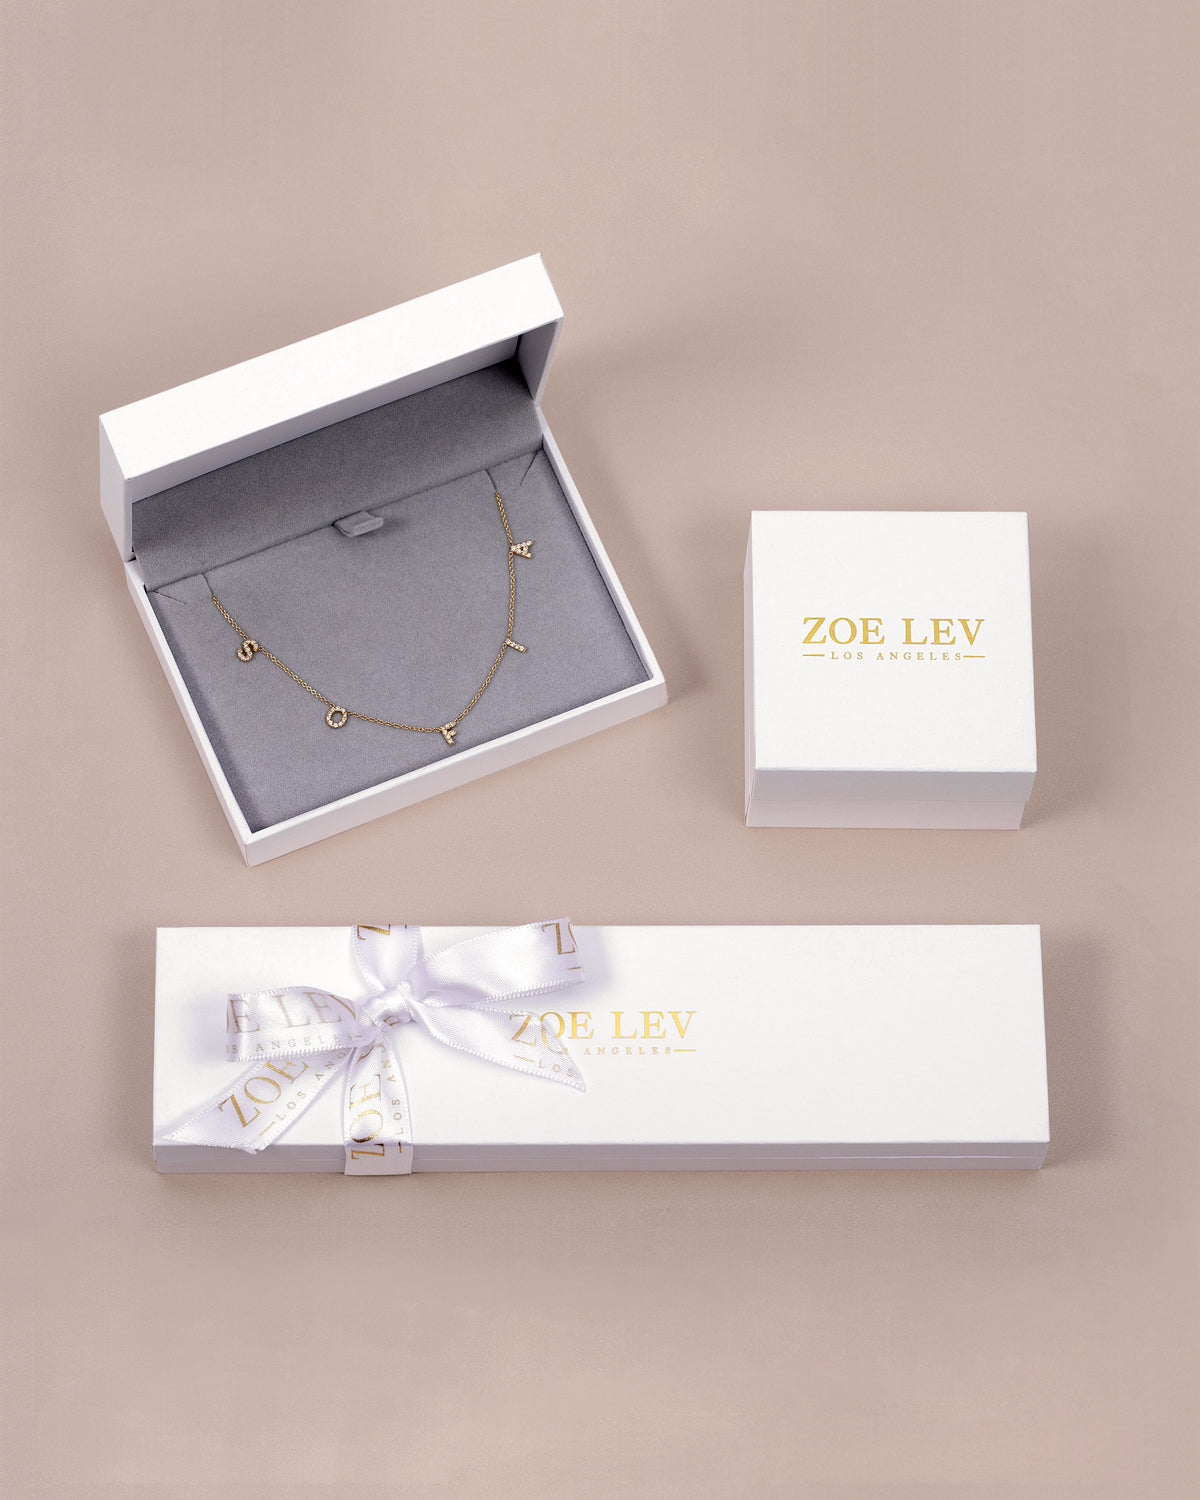 14k Gold Initial and Bezel Diamond Necklace